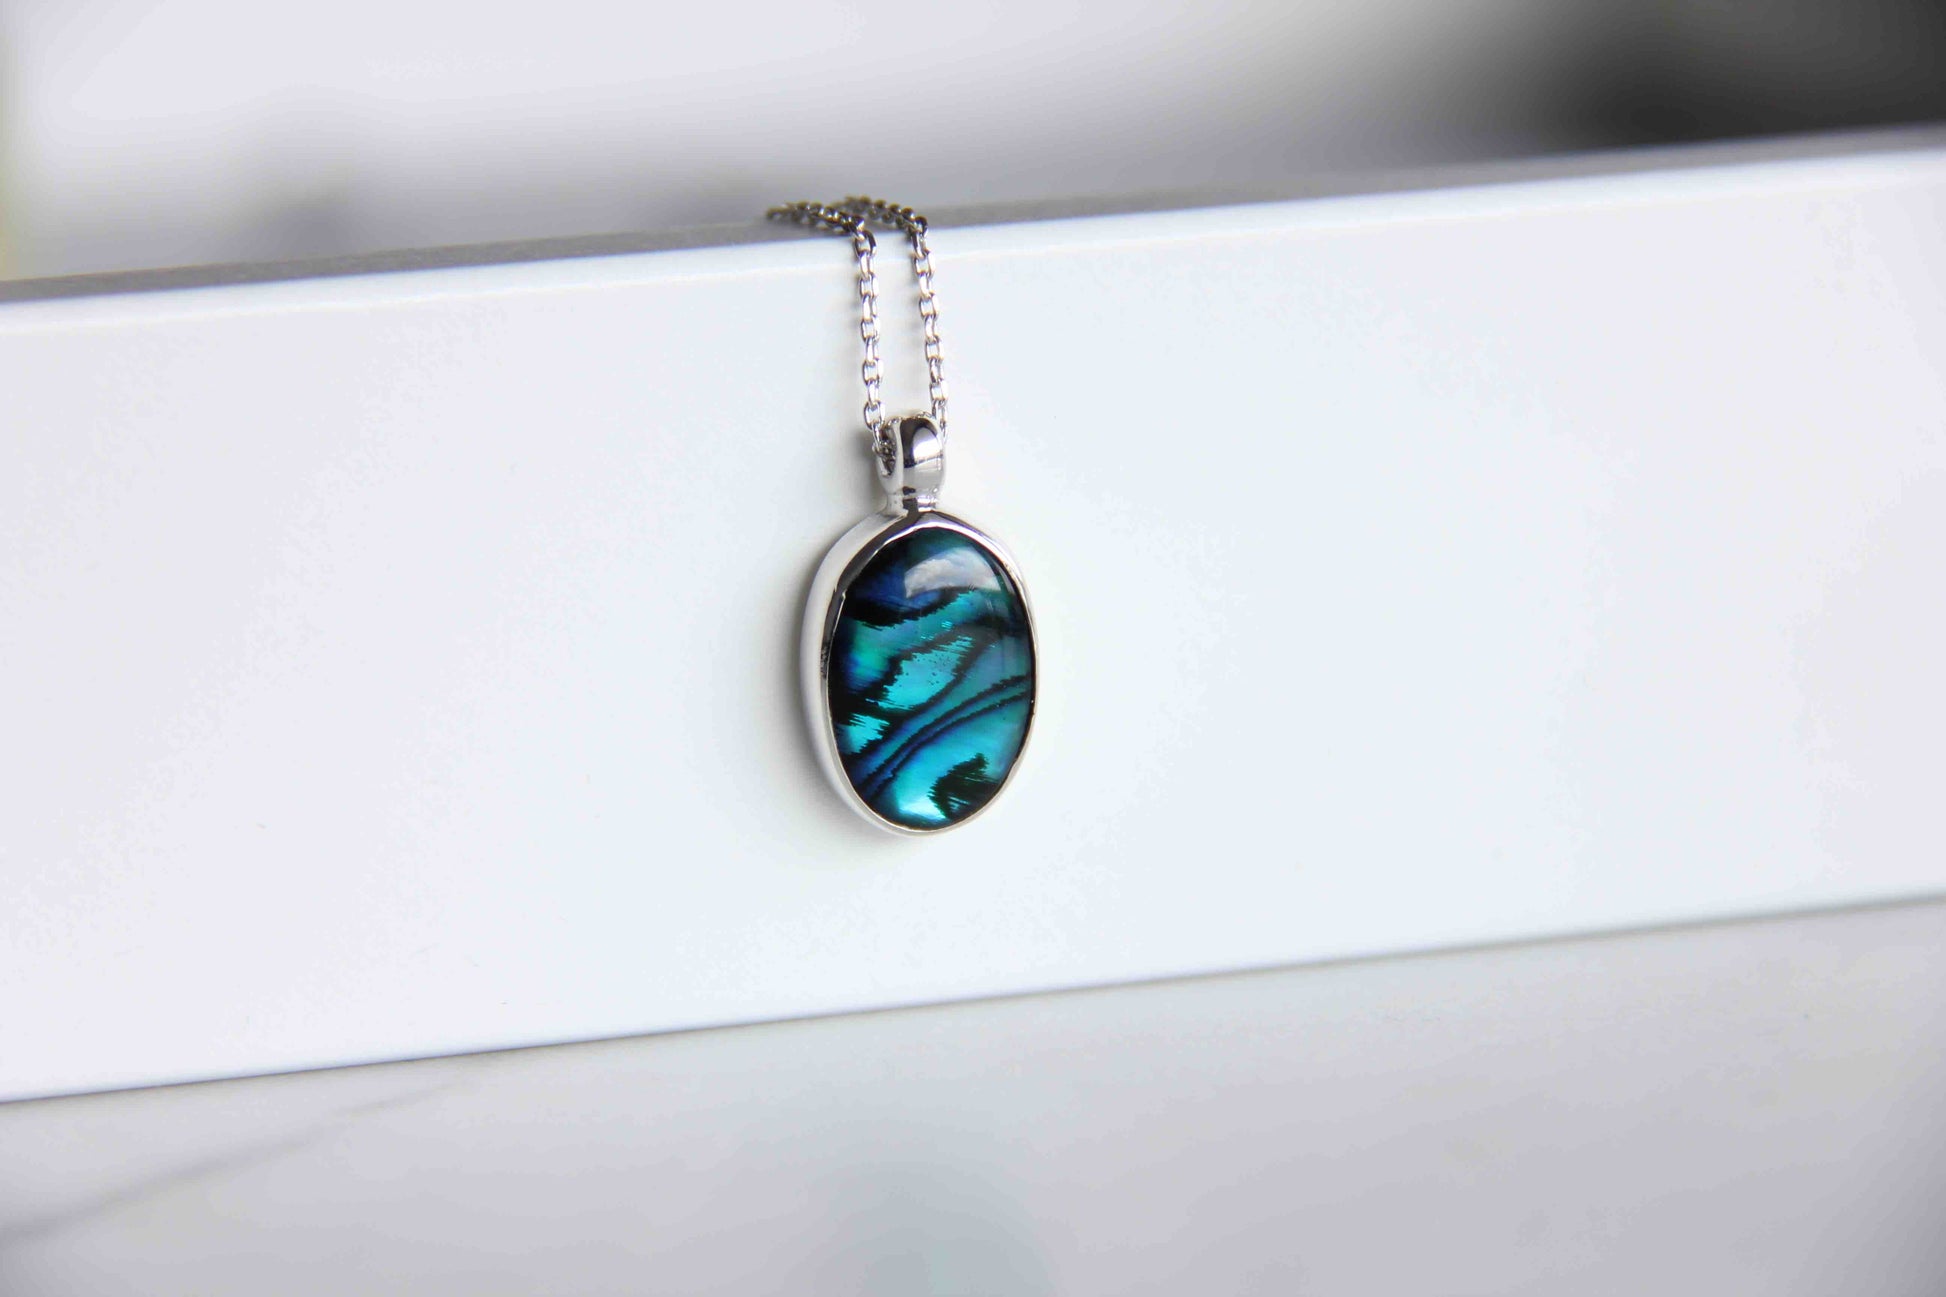 Abalone Necklace, Abalone Necklace, Pendant Necklace, Silver Chain Necklace,Gemstone Necklace, Abalone Shell Jewelry